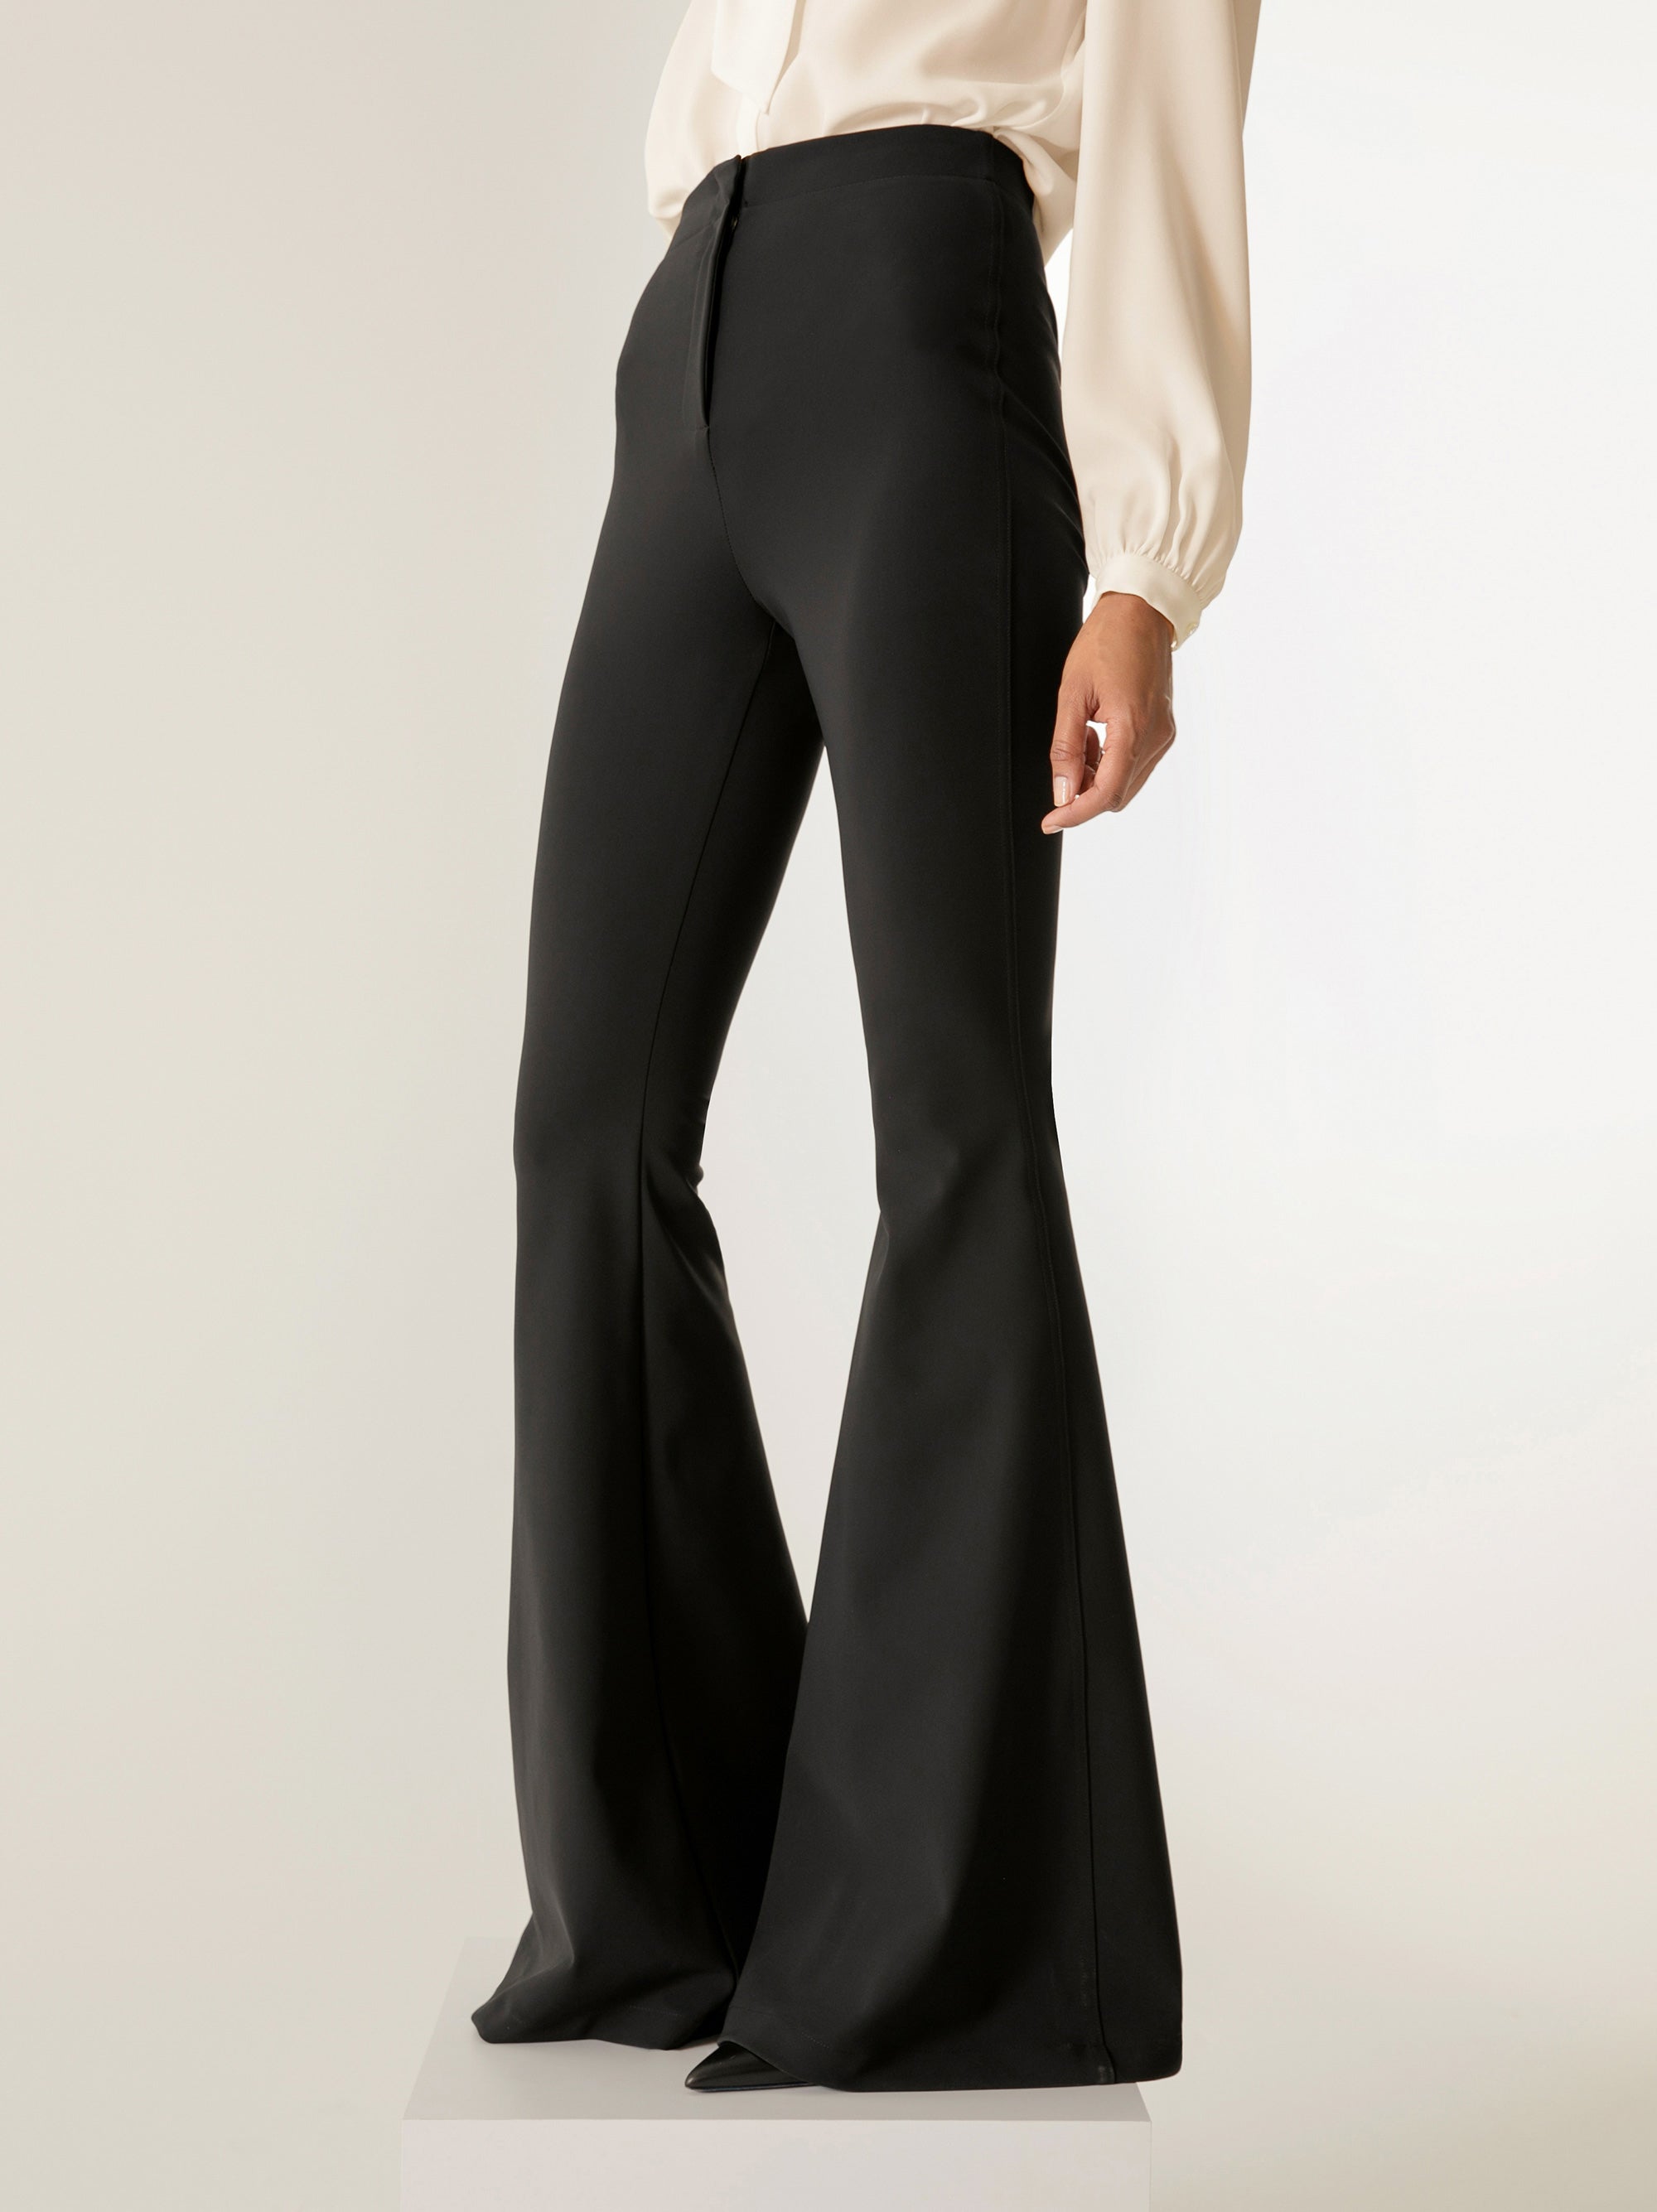 Grooviest flare pants: The NYX Super Flare – PAIRE Los Angeles